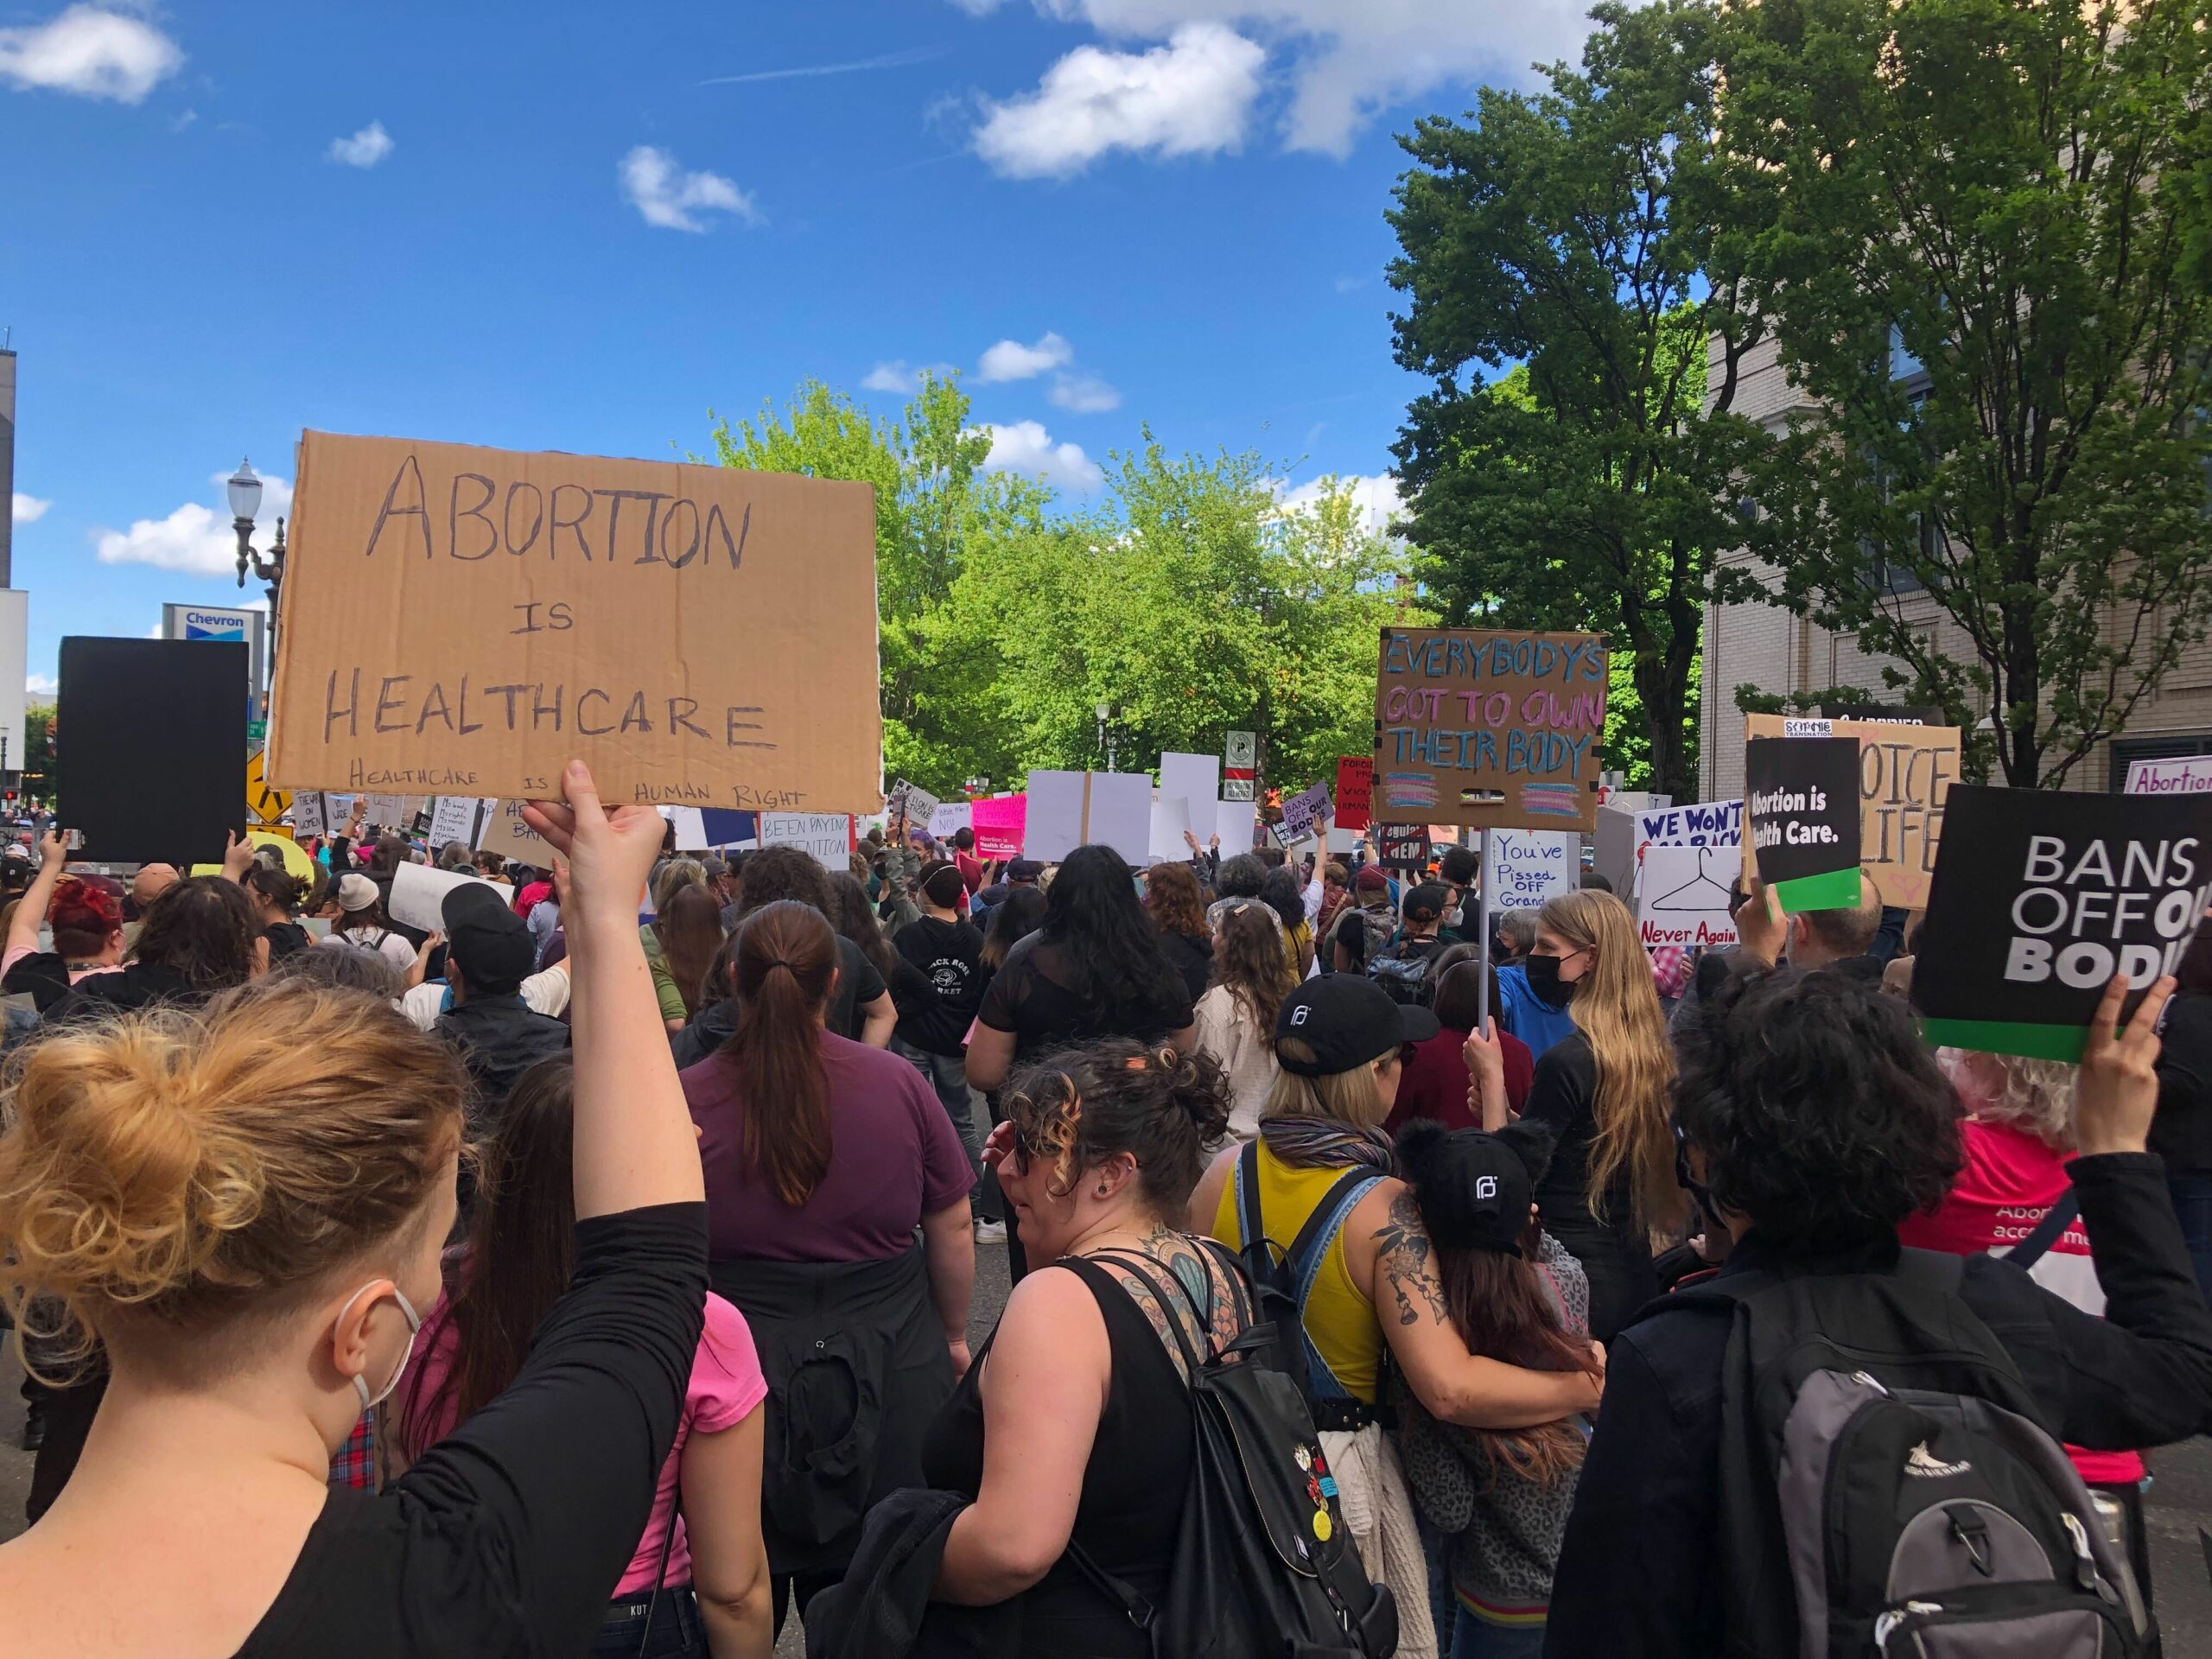 Pro-choice protesters in Portland, Oregon. A woman holds a sign that says "Abortion is healthcare"